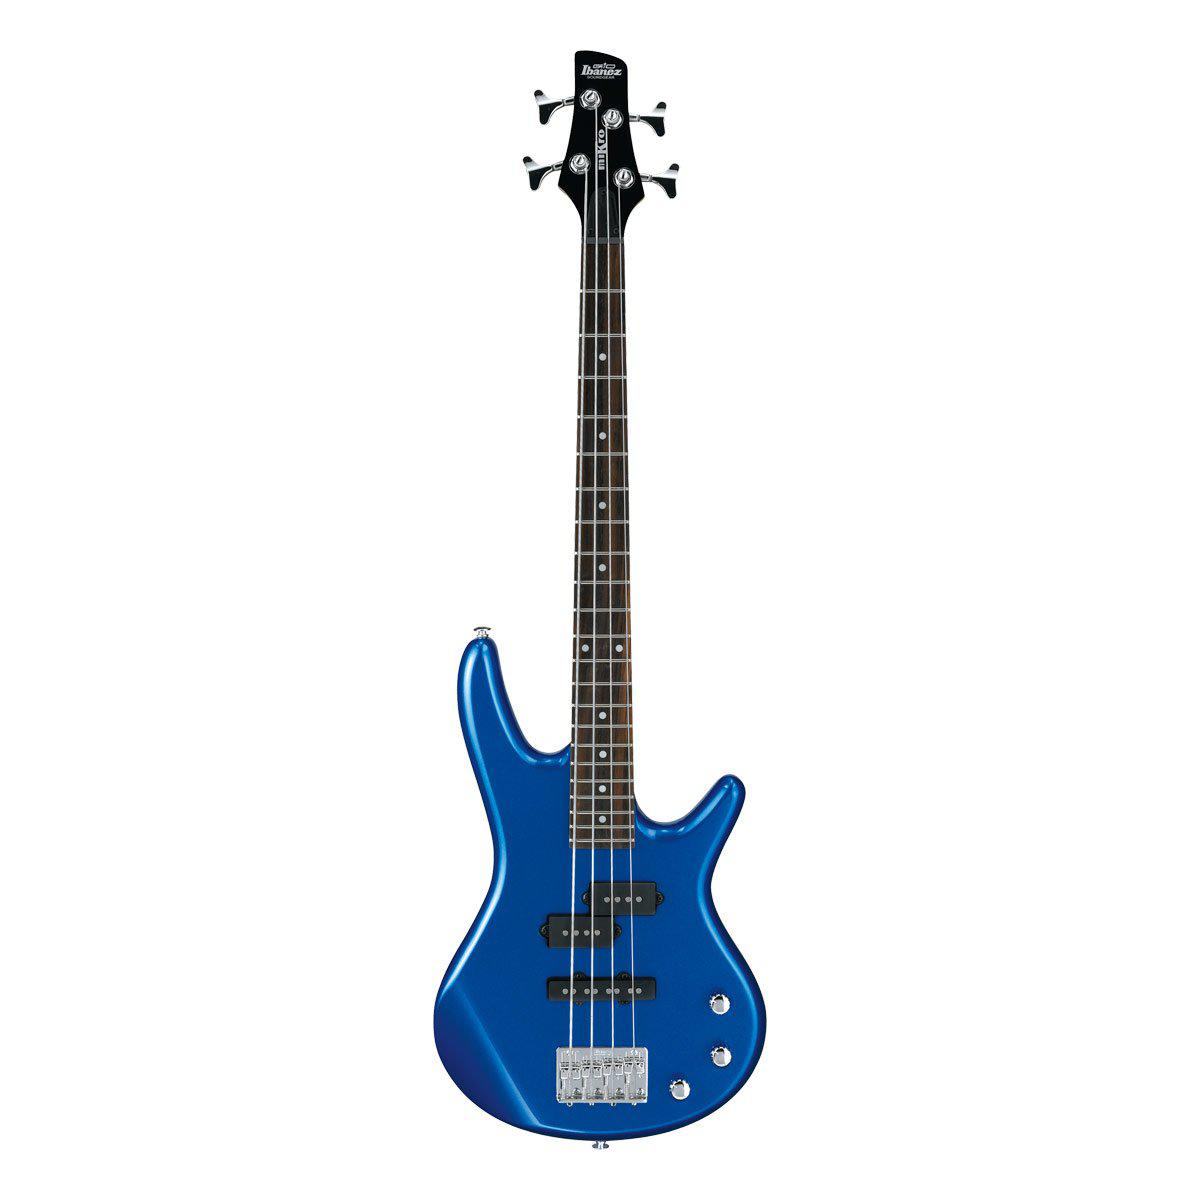 Ibanez GSRM20 Mikro Short Scale Bass Guitar-Starlight Blue-Andy's Music